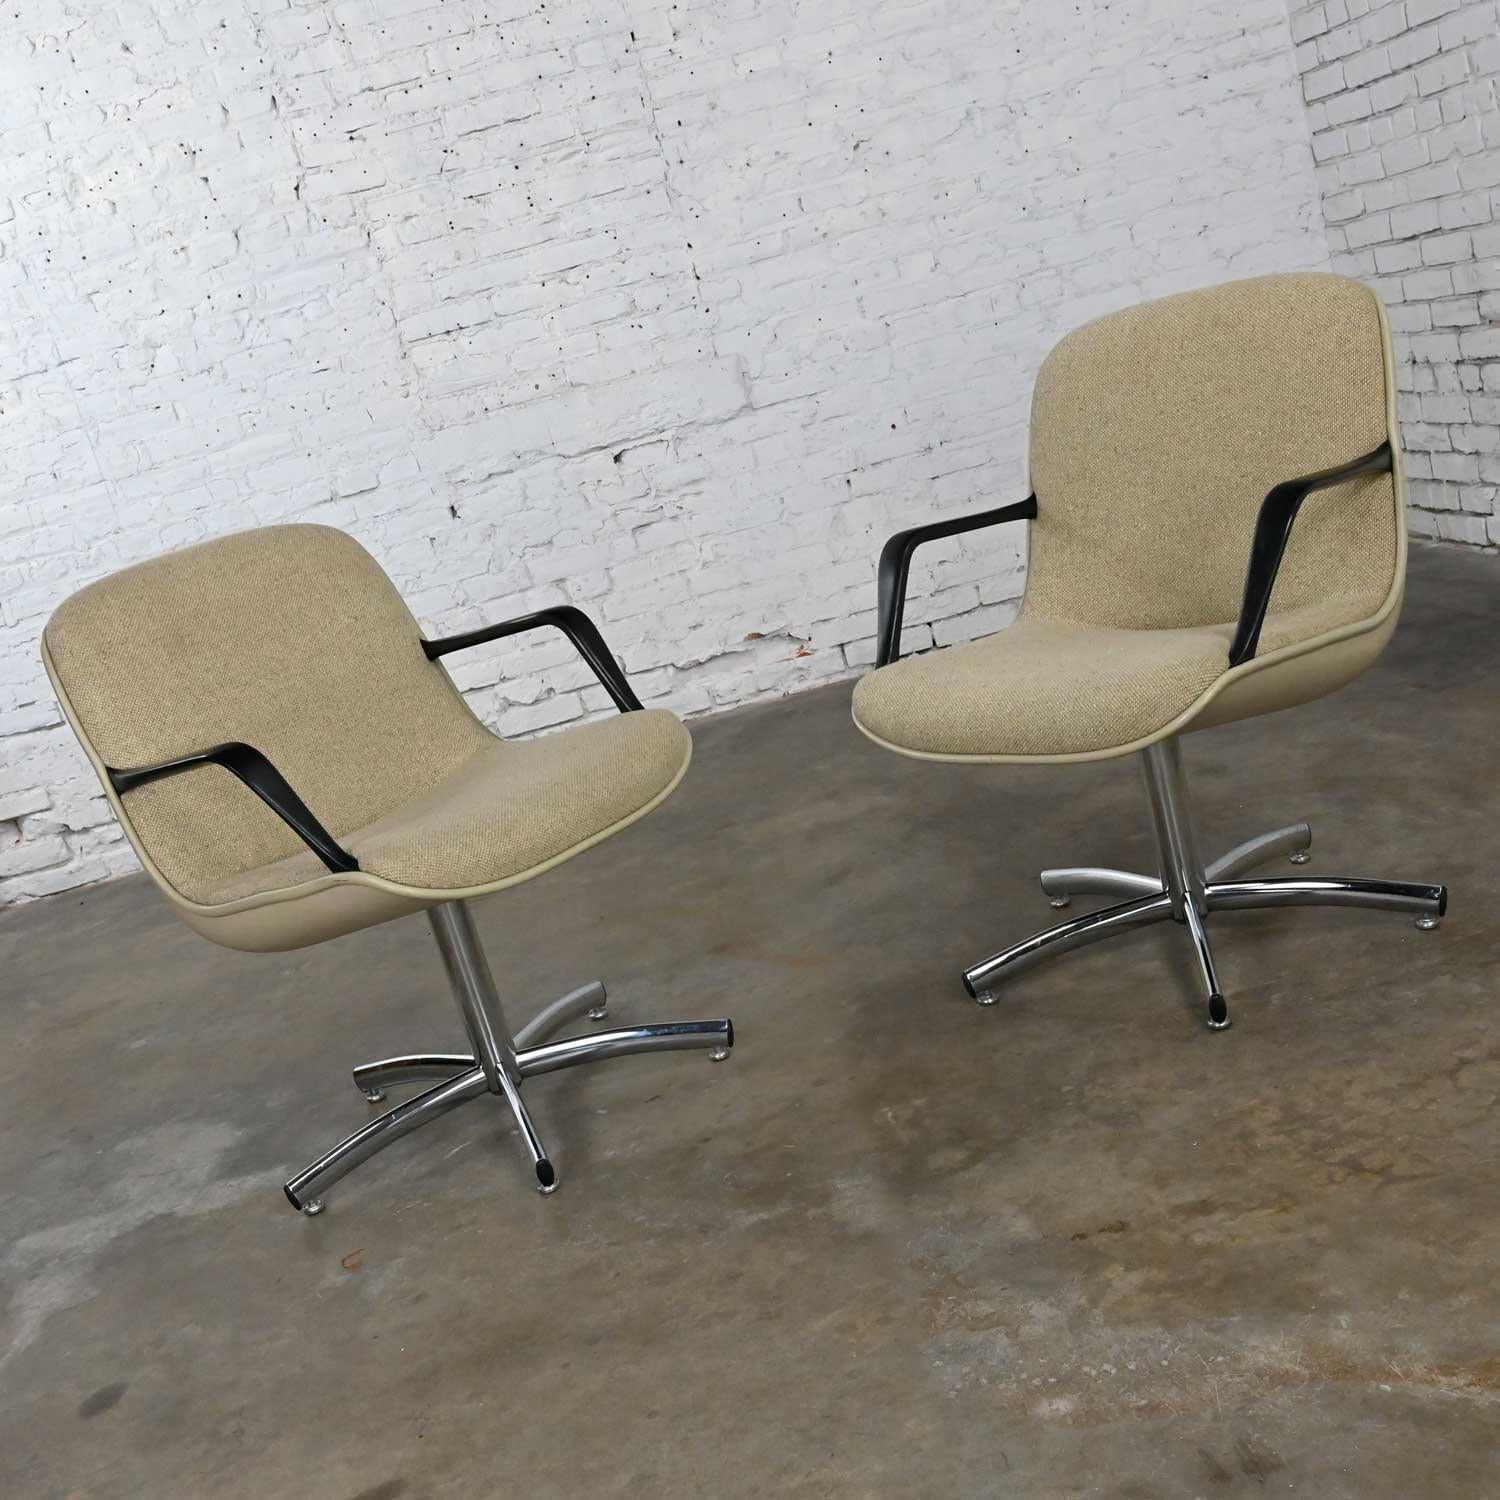 Fabric Modern Steelcase #451 5 Prong Chrome Base Office Chairs Style Charles Pollock Pr